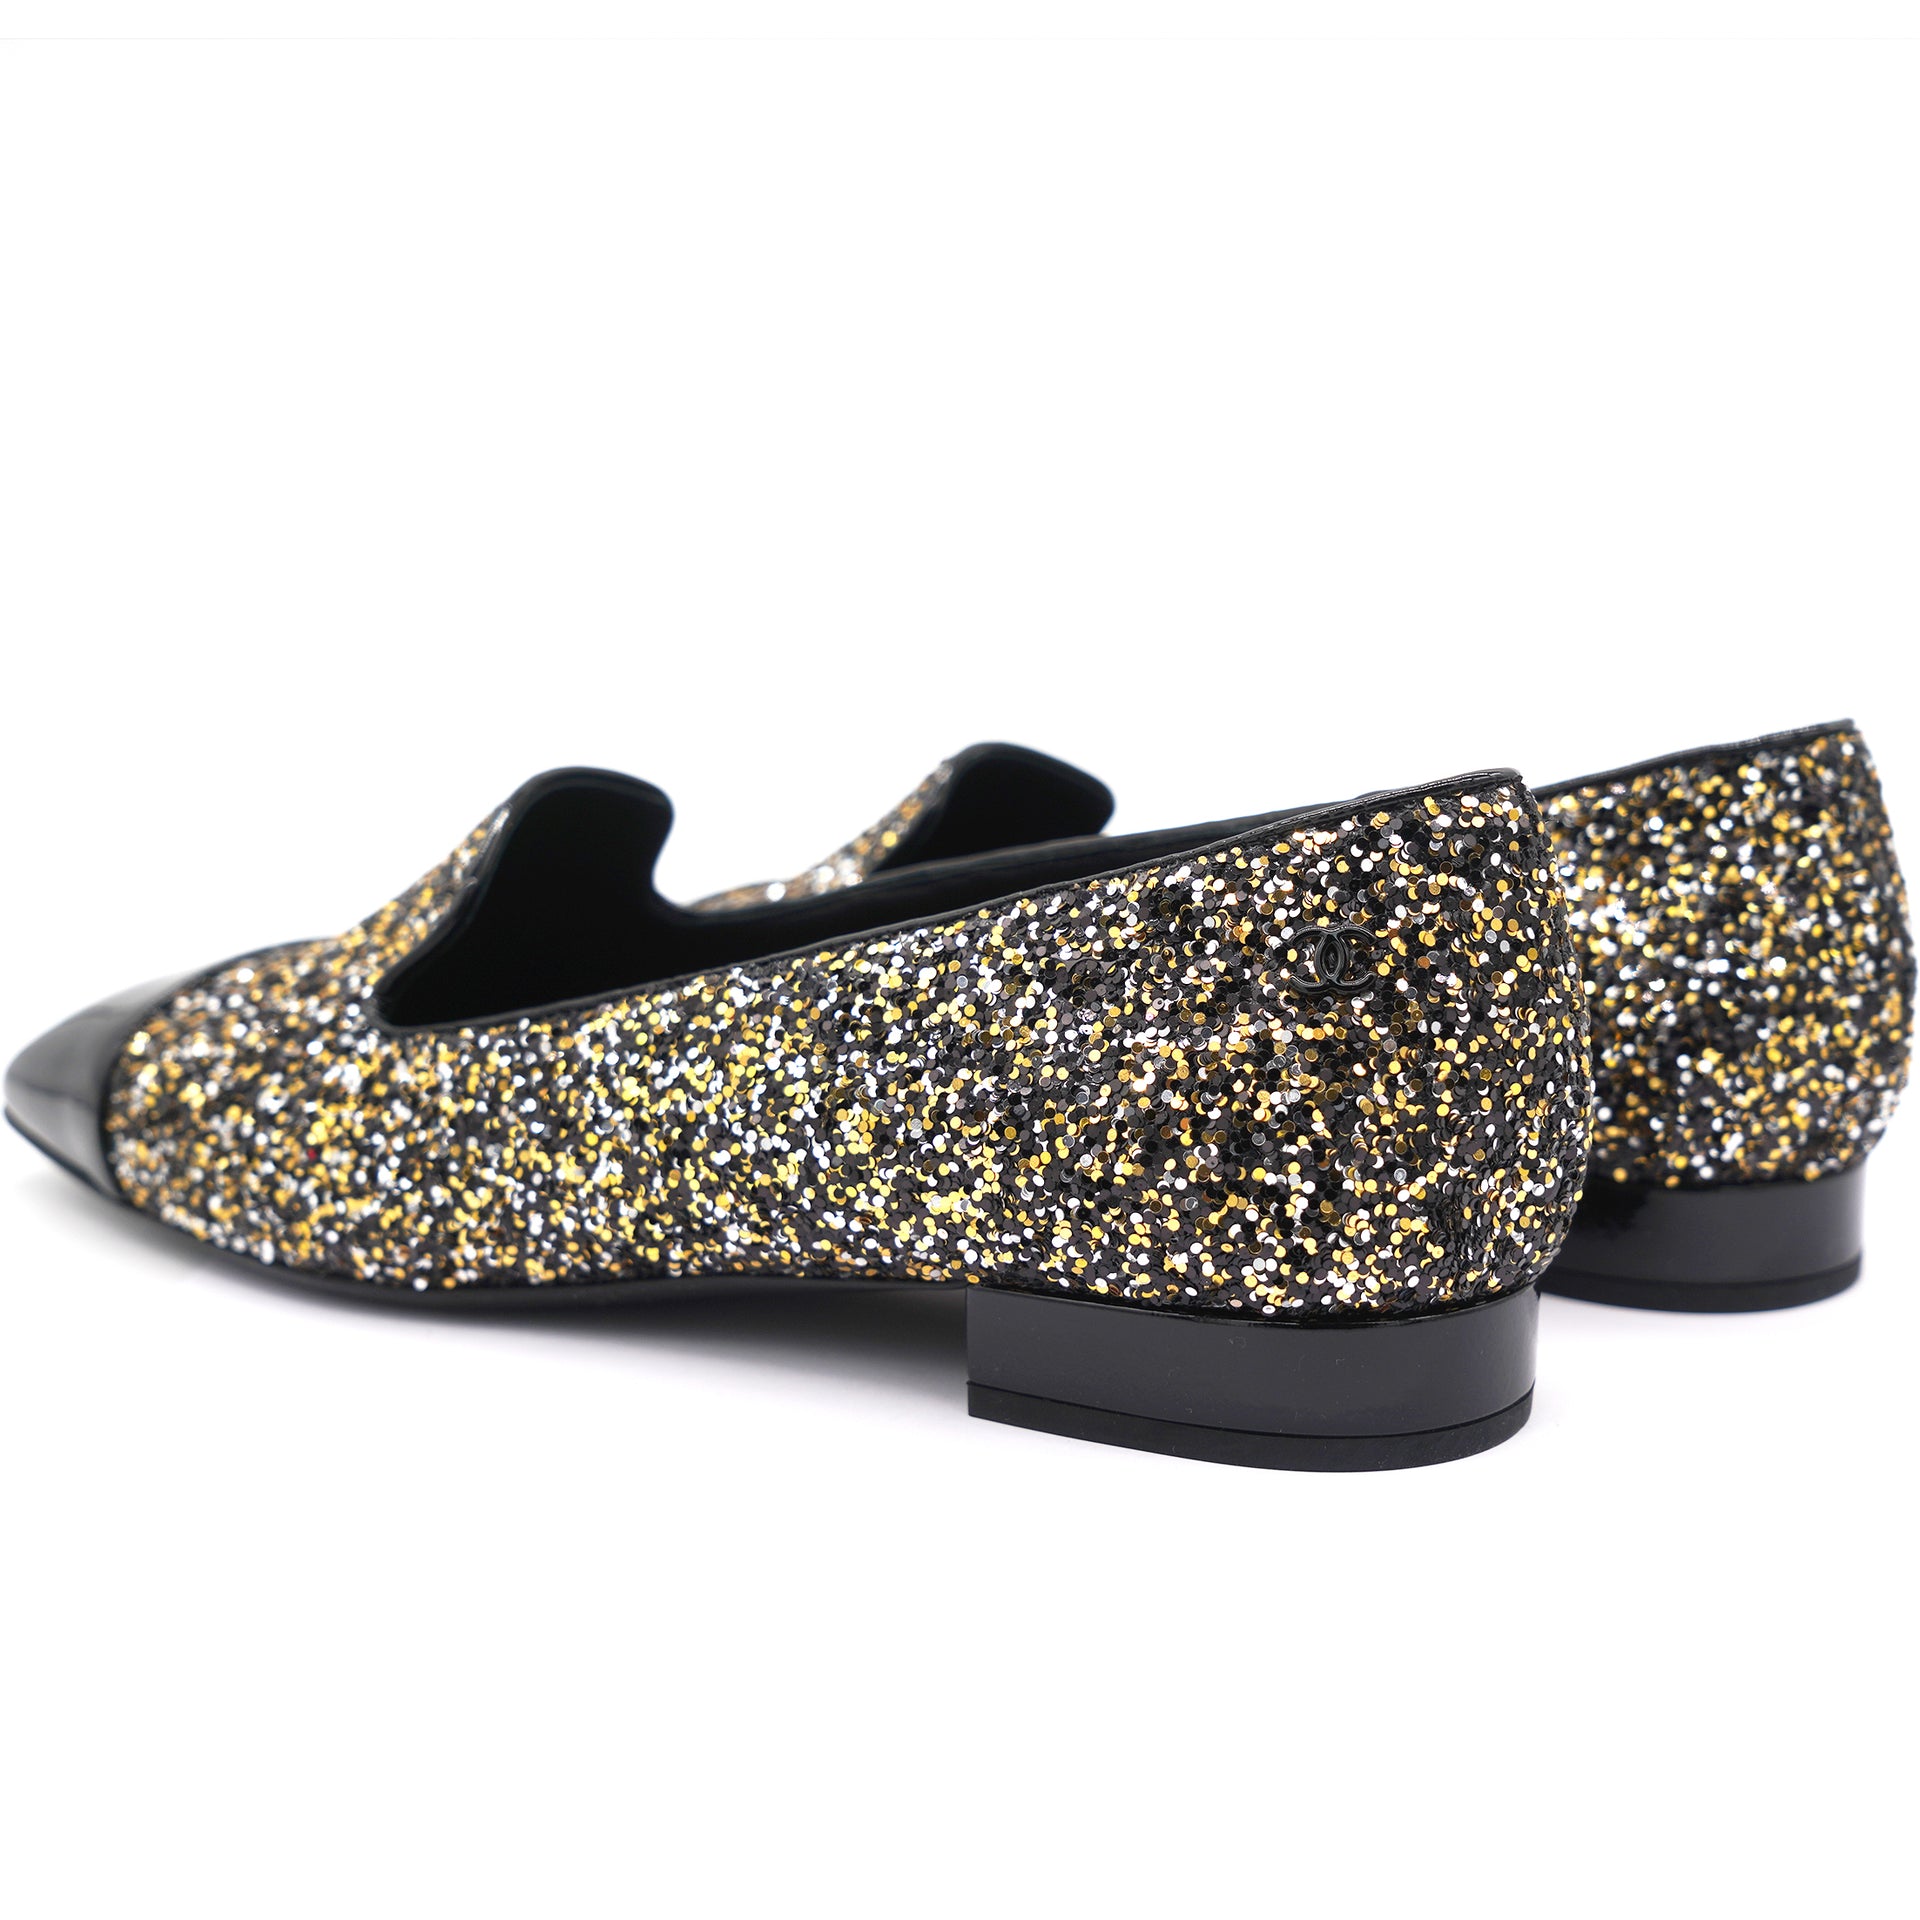 Glitter and Black Patent Leather Cap Toe Loafers 38.5